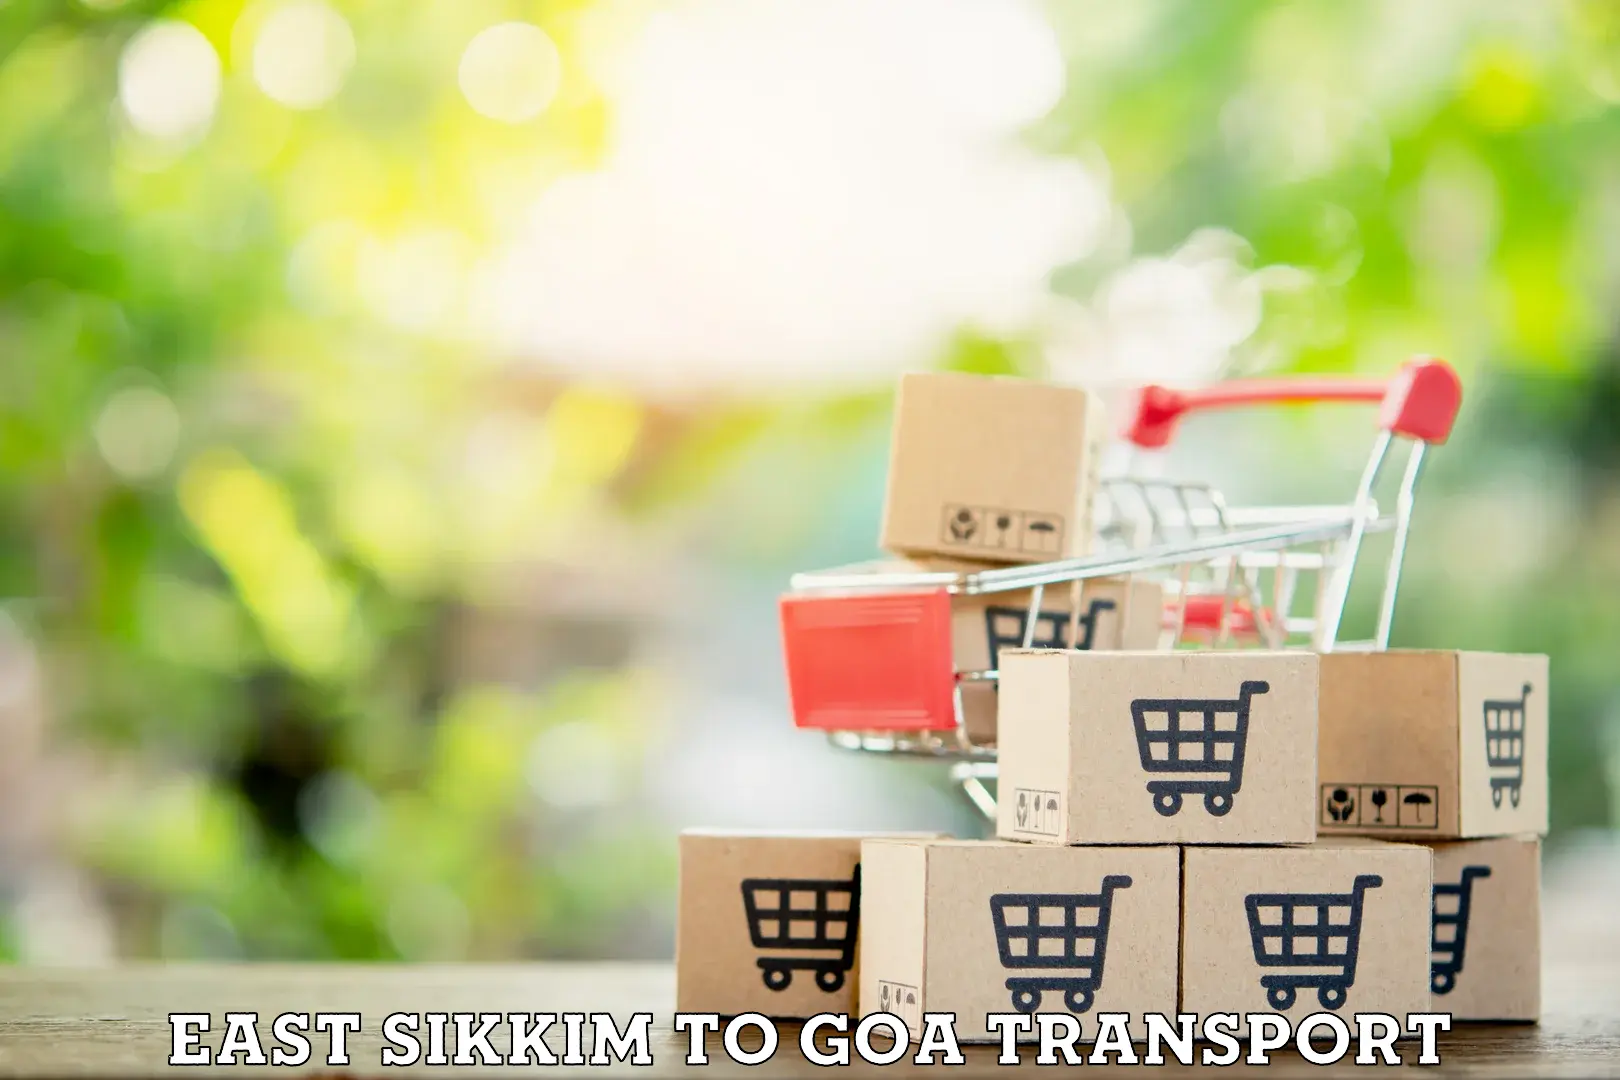 Transport in sharing in East Sikkim to Goa University